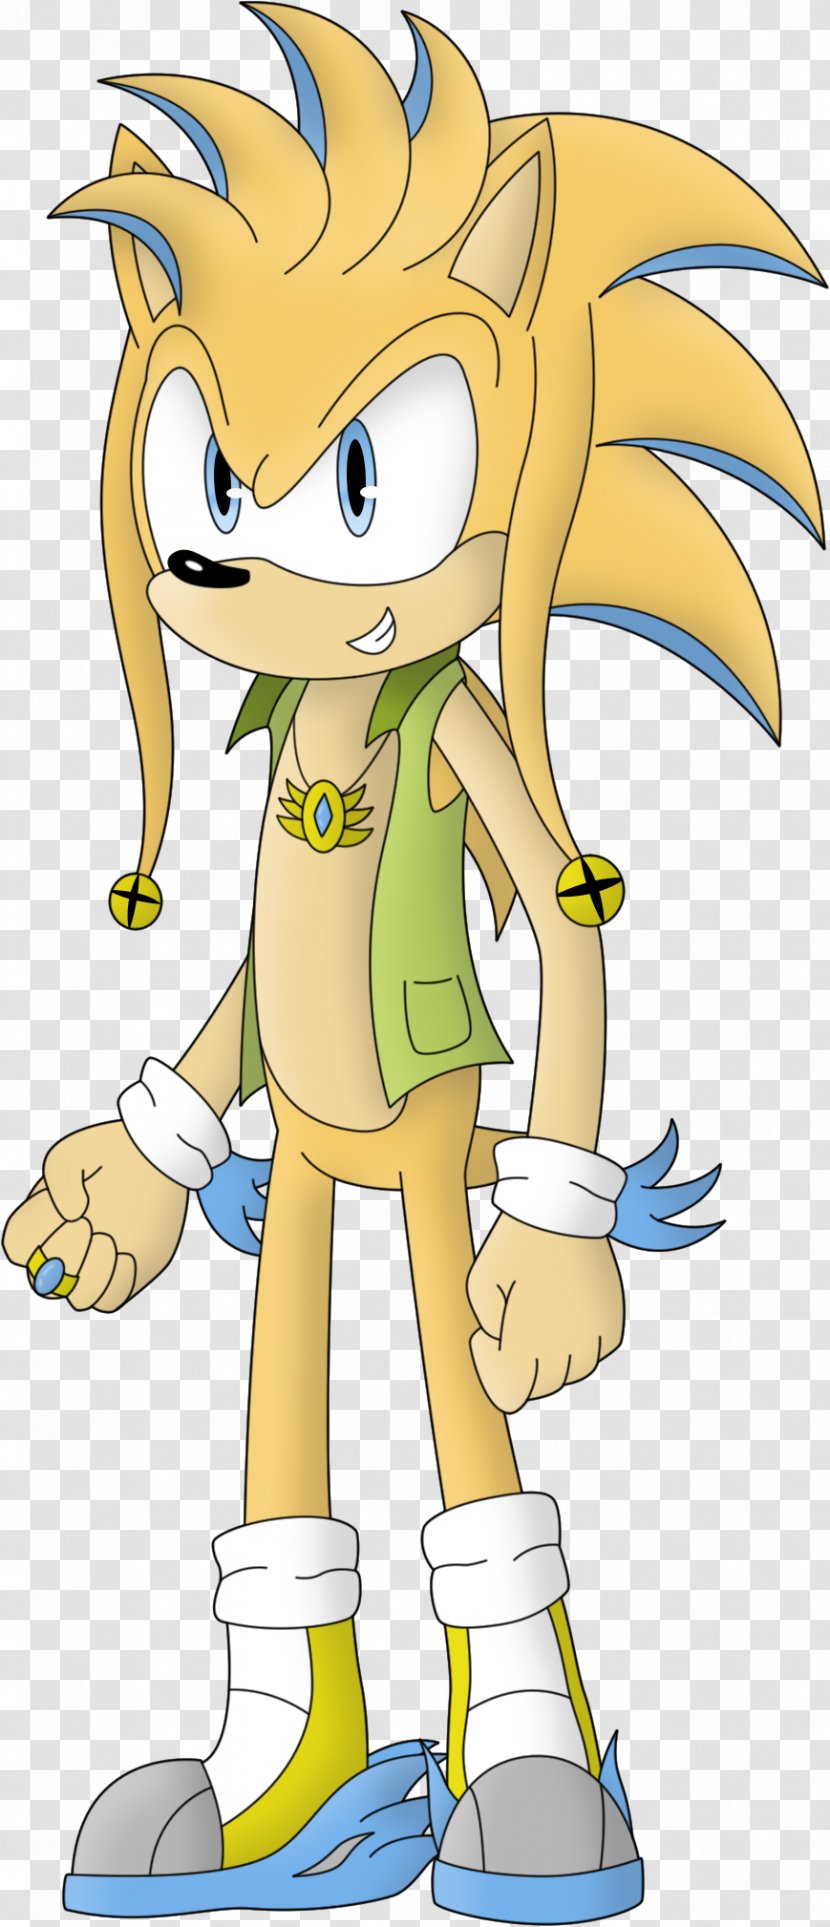 Fiction Work Of Art Character - Flower - Sonic The Hedgehog Transparent PNG